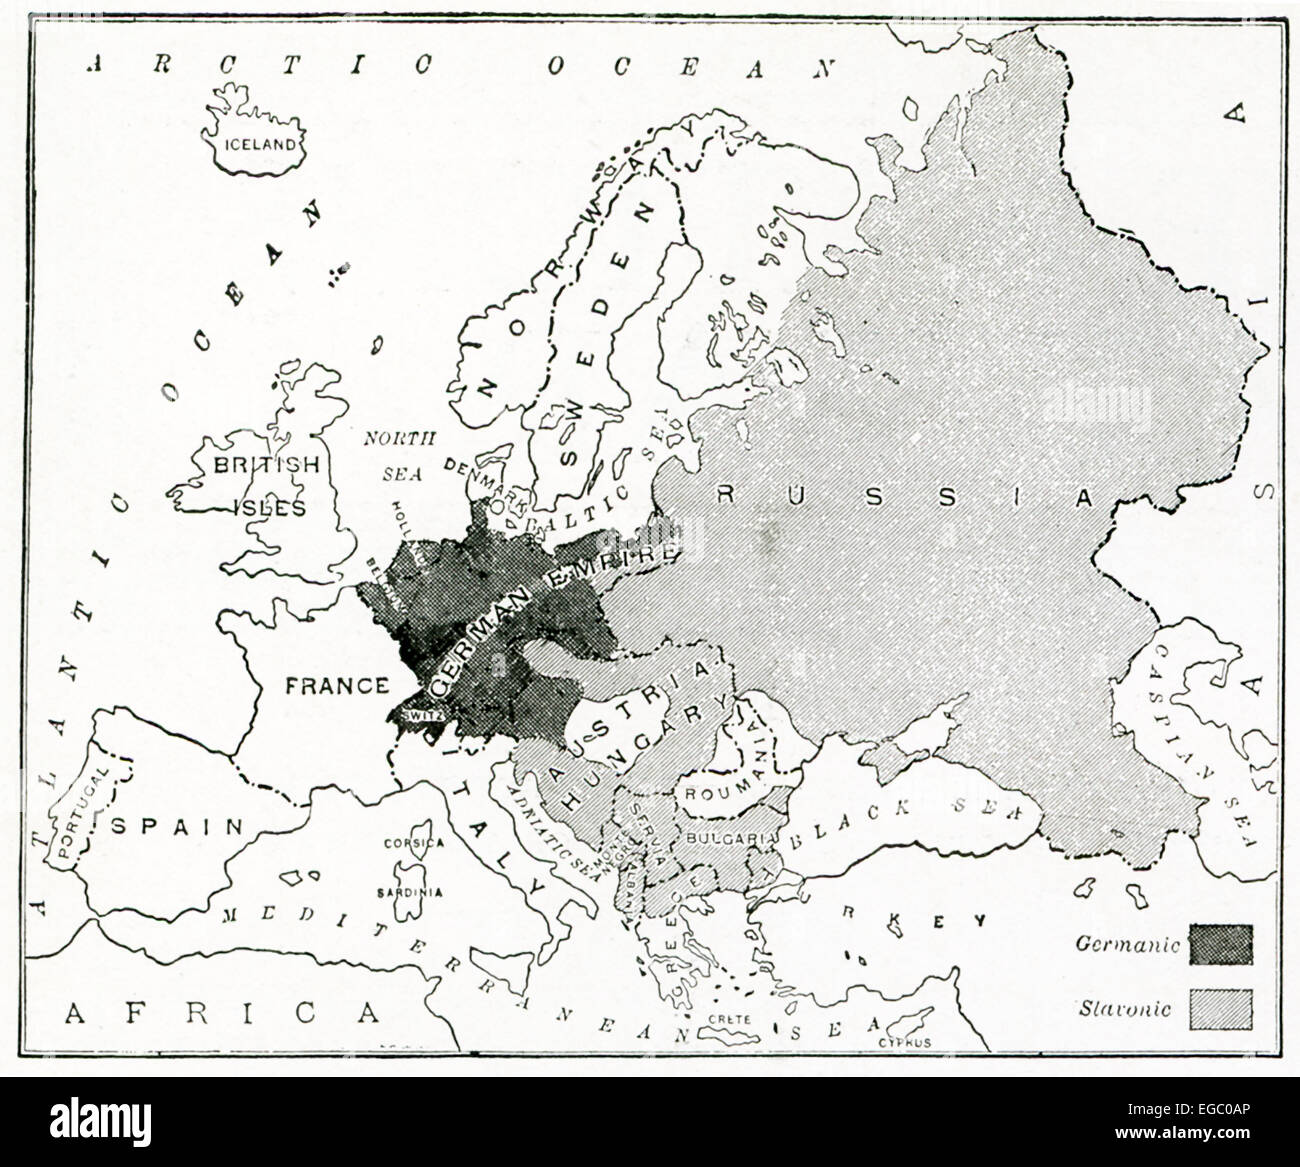 This map shows Europe at the start of World War I. The lightly shaded area represents the lands inhabited predominantly by Slavs. The dark shaded area represents the lands inhabited predominantly by Germans. Stock Photo